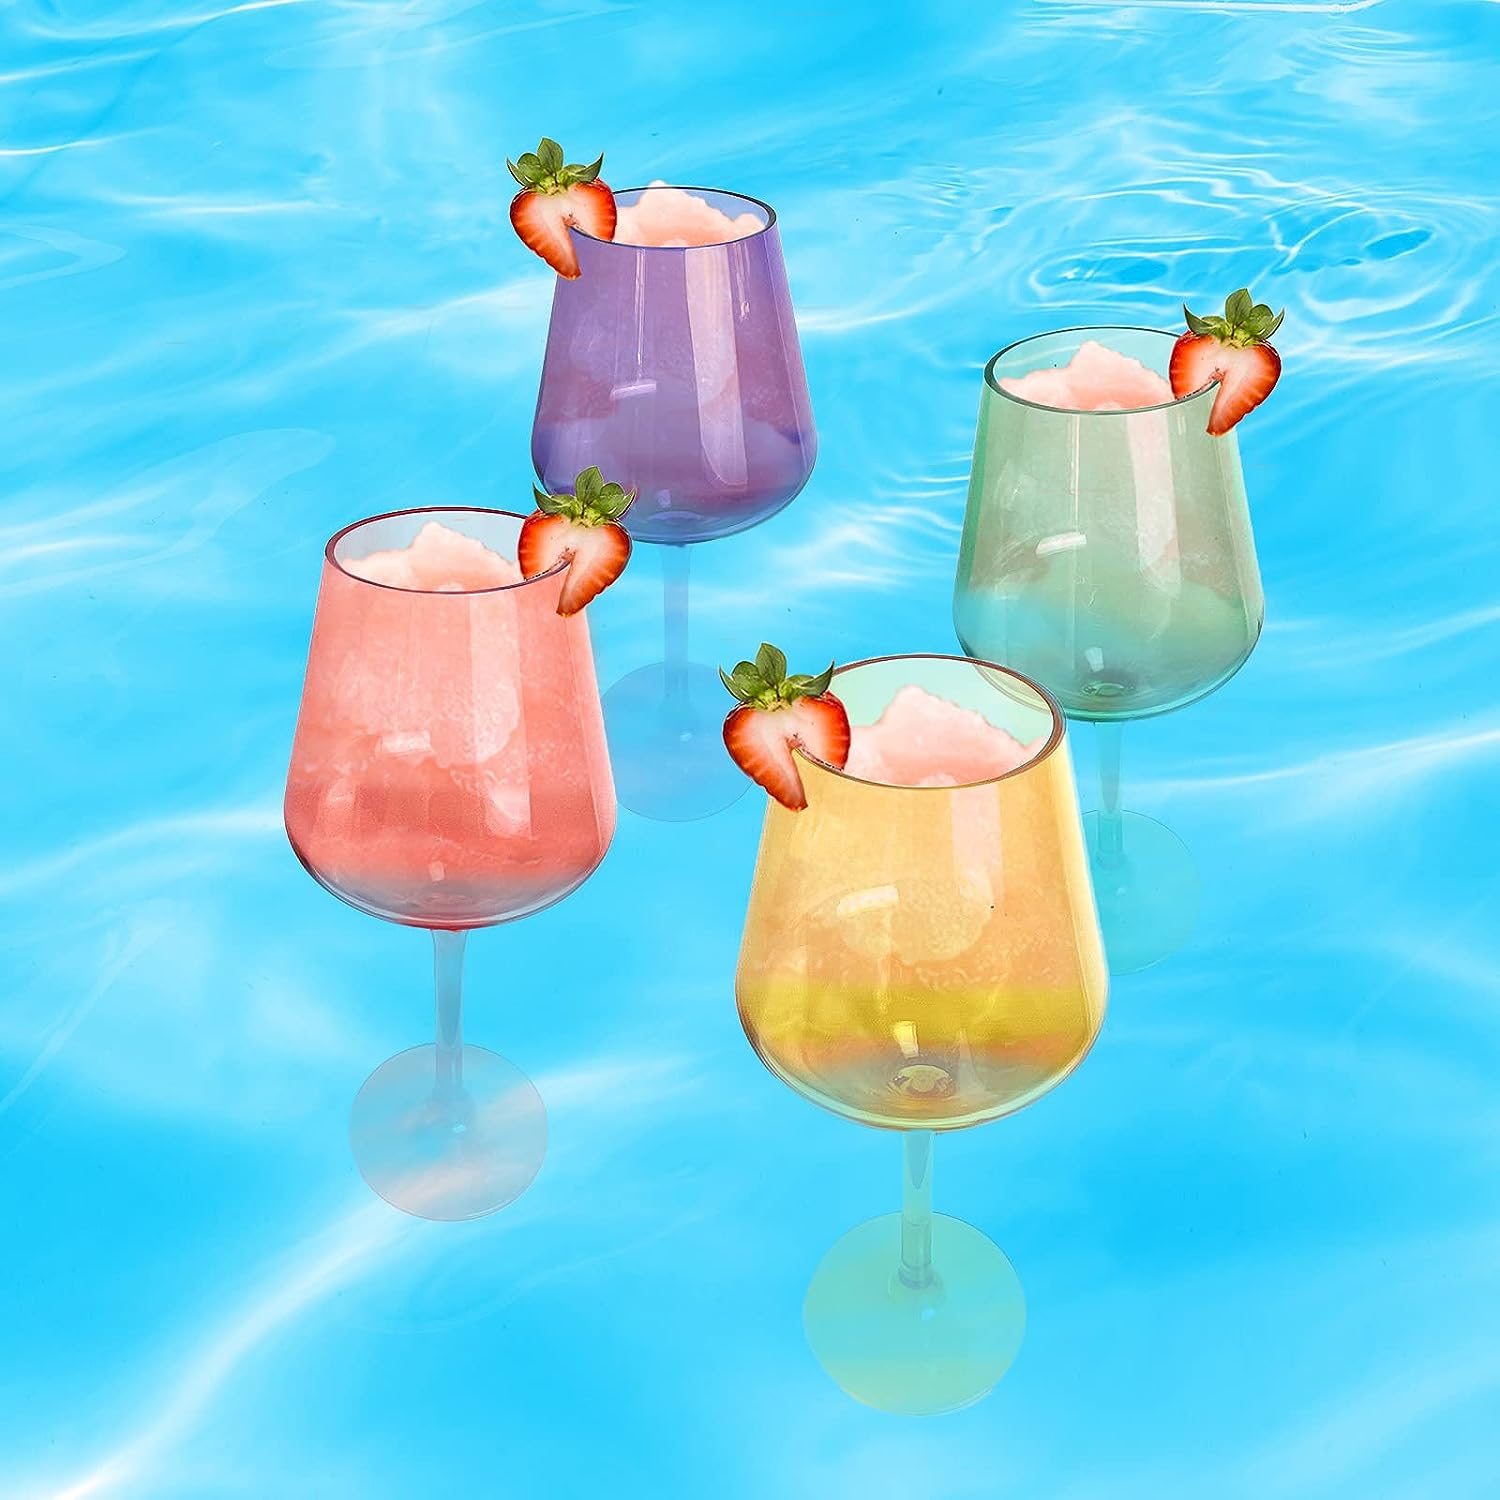 Floating Wine Glasses for Pool - Set of 2-15 OZ Shatterproof Poolside Wine Glasses, Tritan Plastic Reusable, Beach Outdoor Cocktail, Wine, Champagne, Water Glassware Spring Summer (Muted Blue)-3